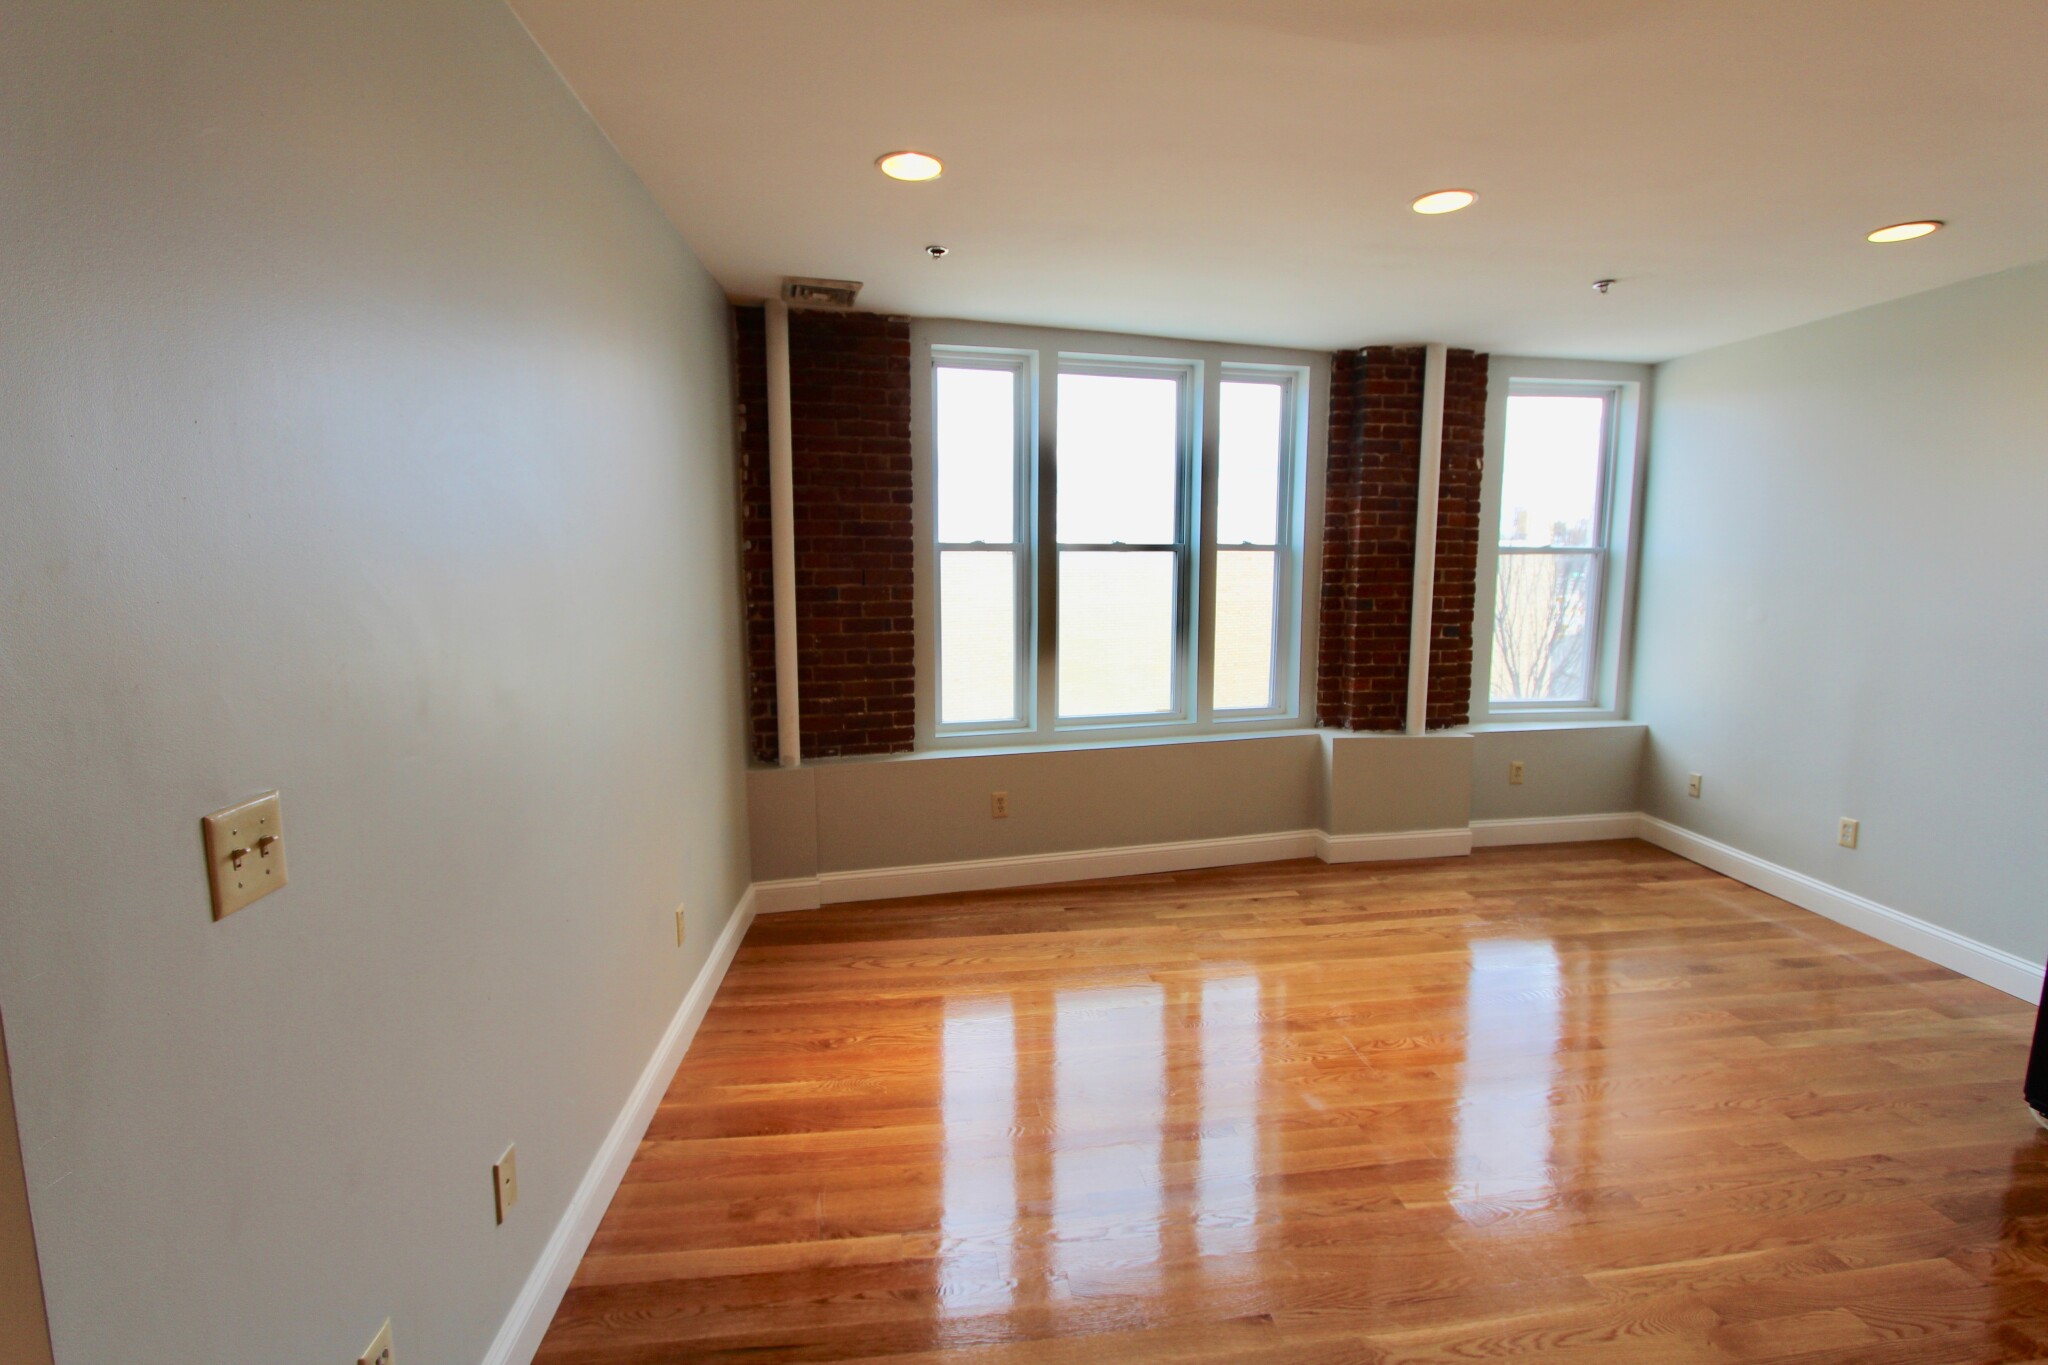 Photos of apartment on Main st.,Fitchburg MA 01420